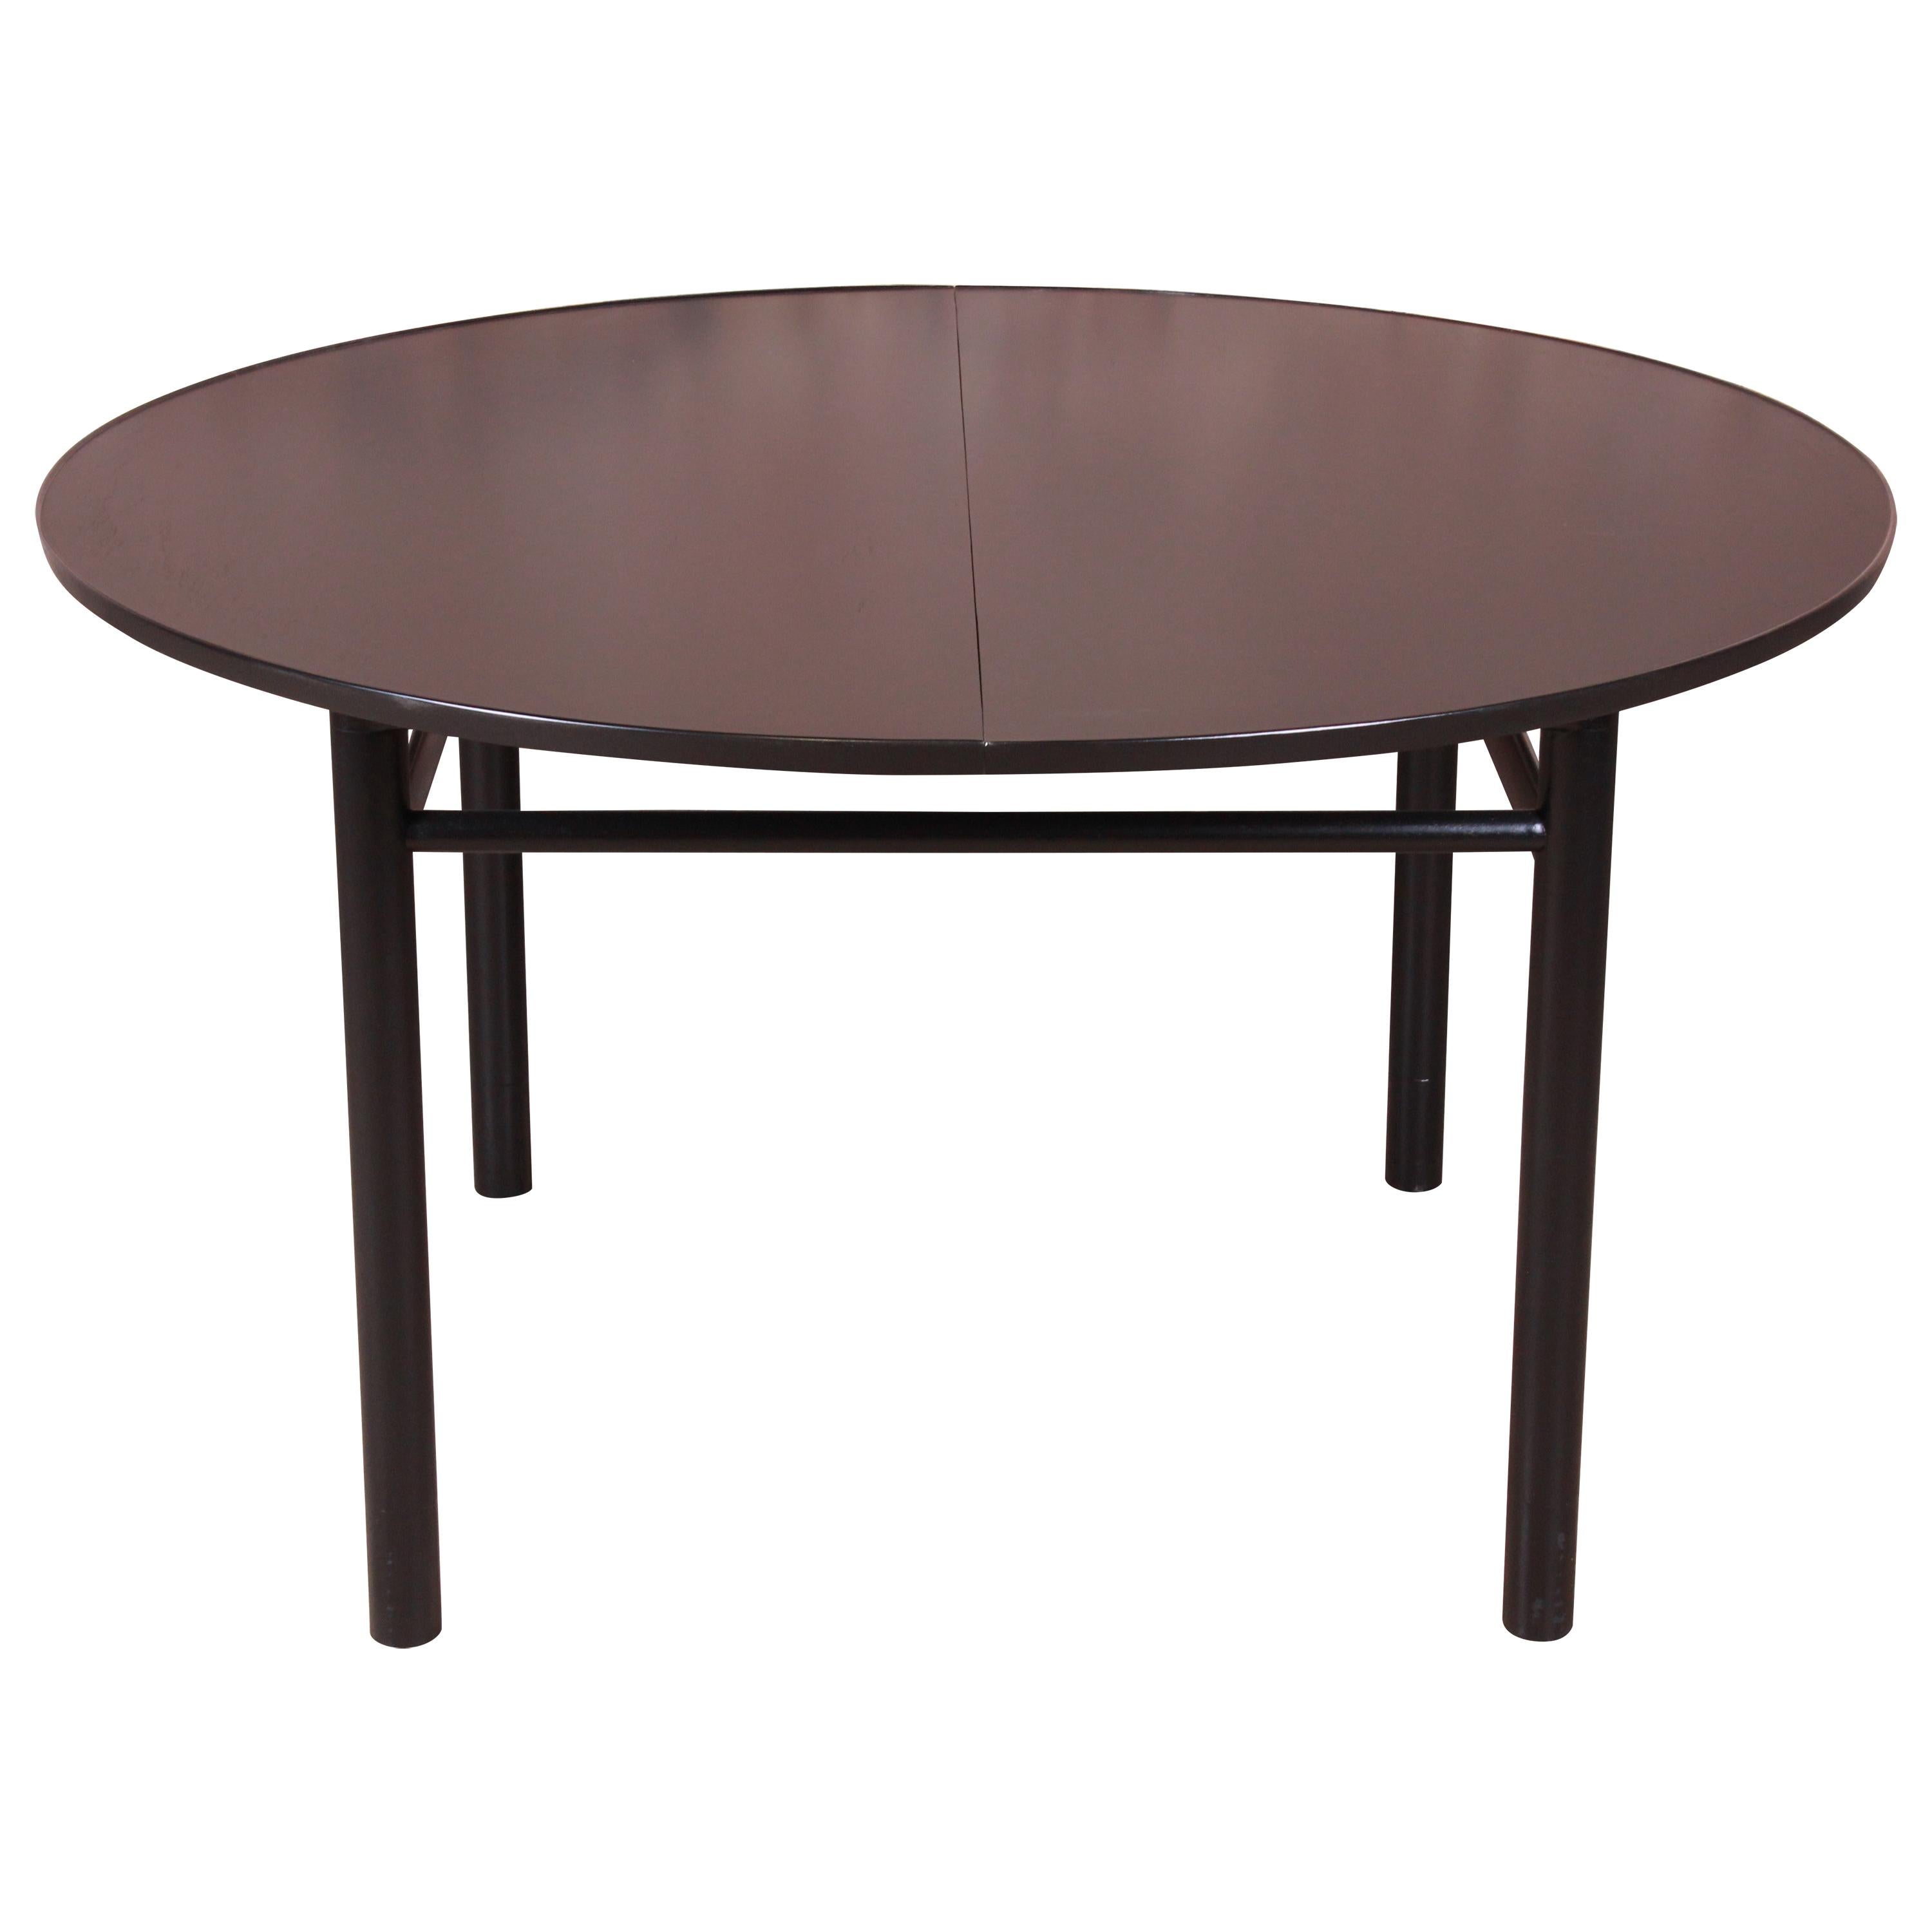 Early Edward Wormley for Dunbar Ebonized Extension Dining Table, Newly Restored